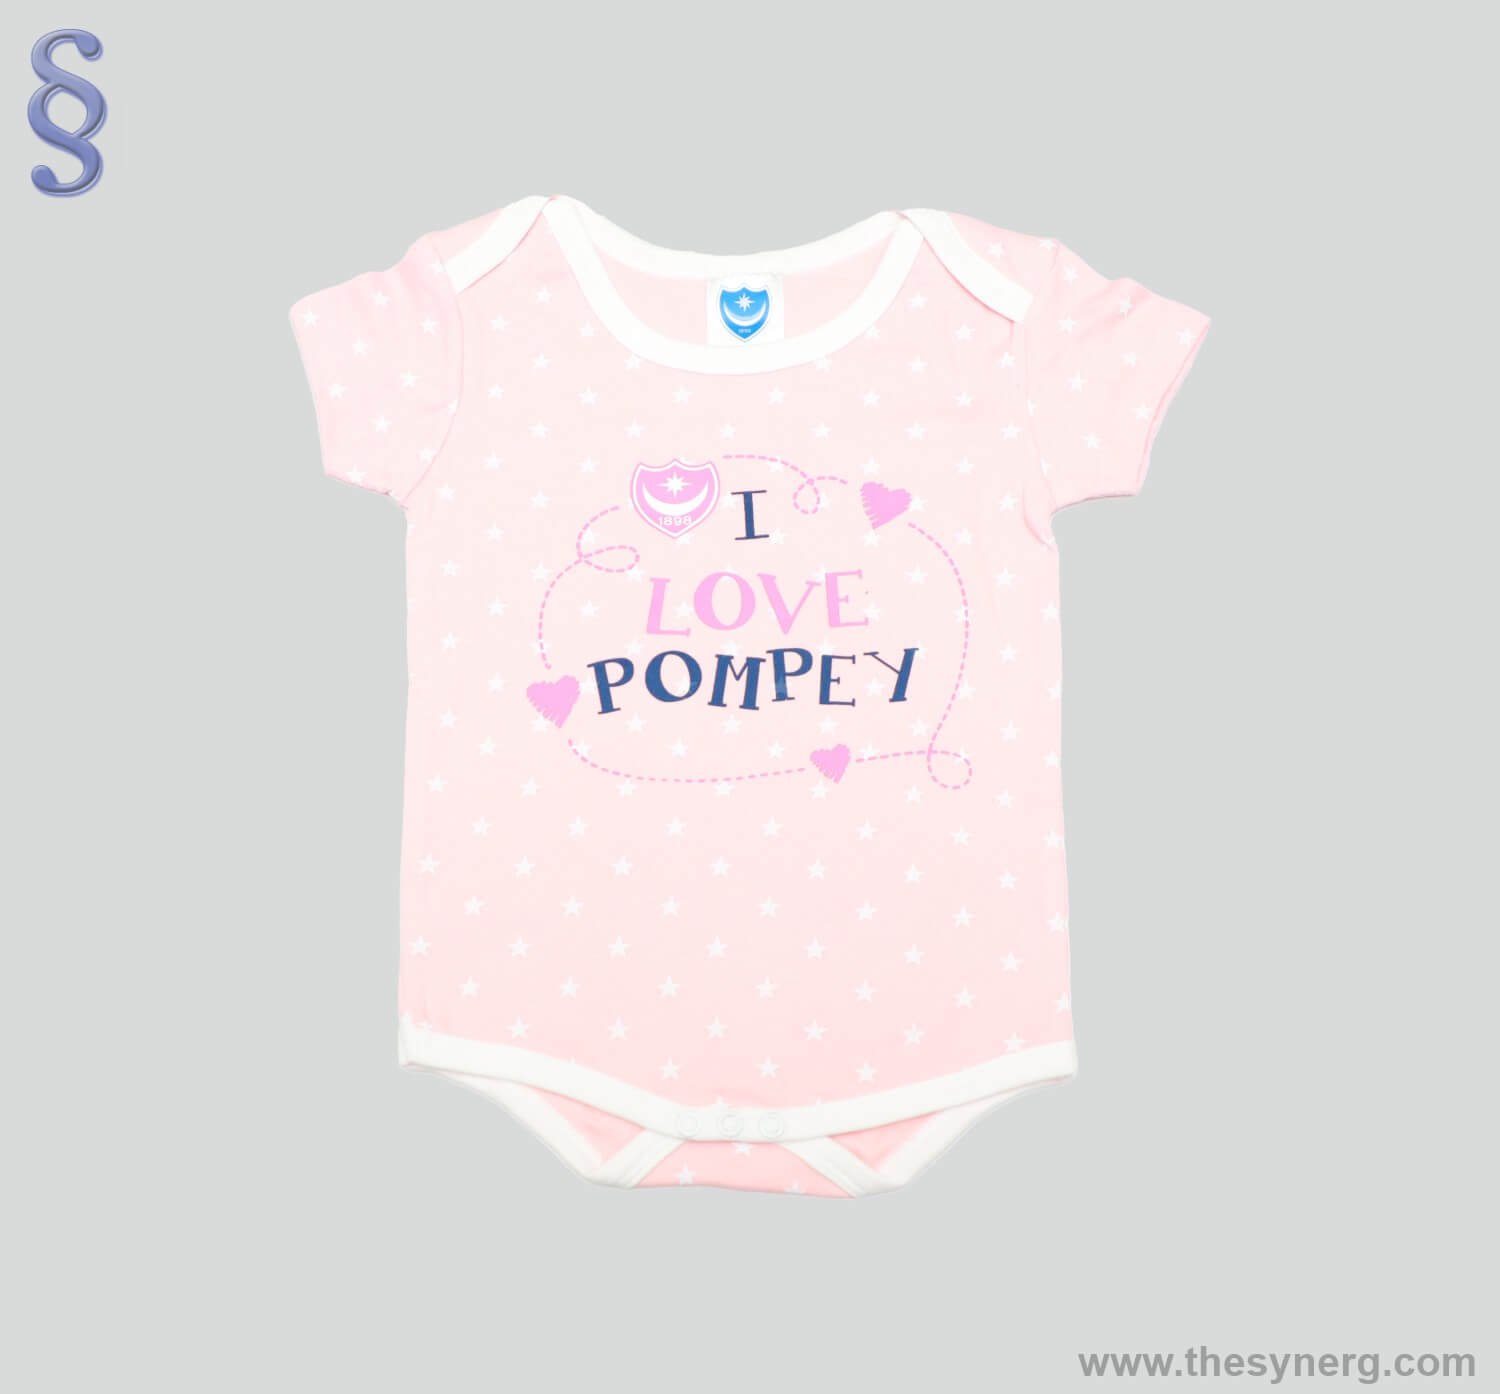 Printed embroidered baby clothing romper made in baby clothing manufacturing factory in tirupur in India